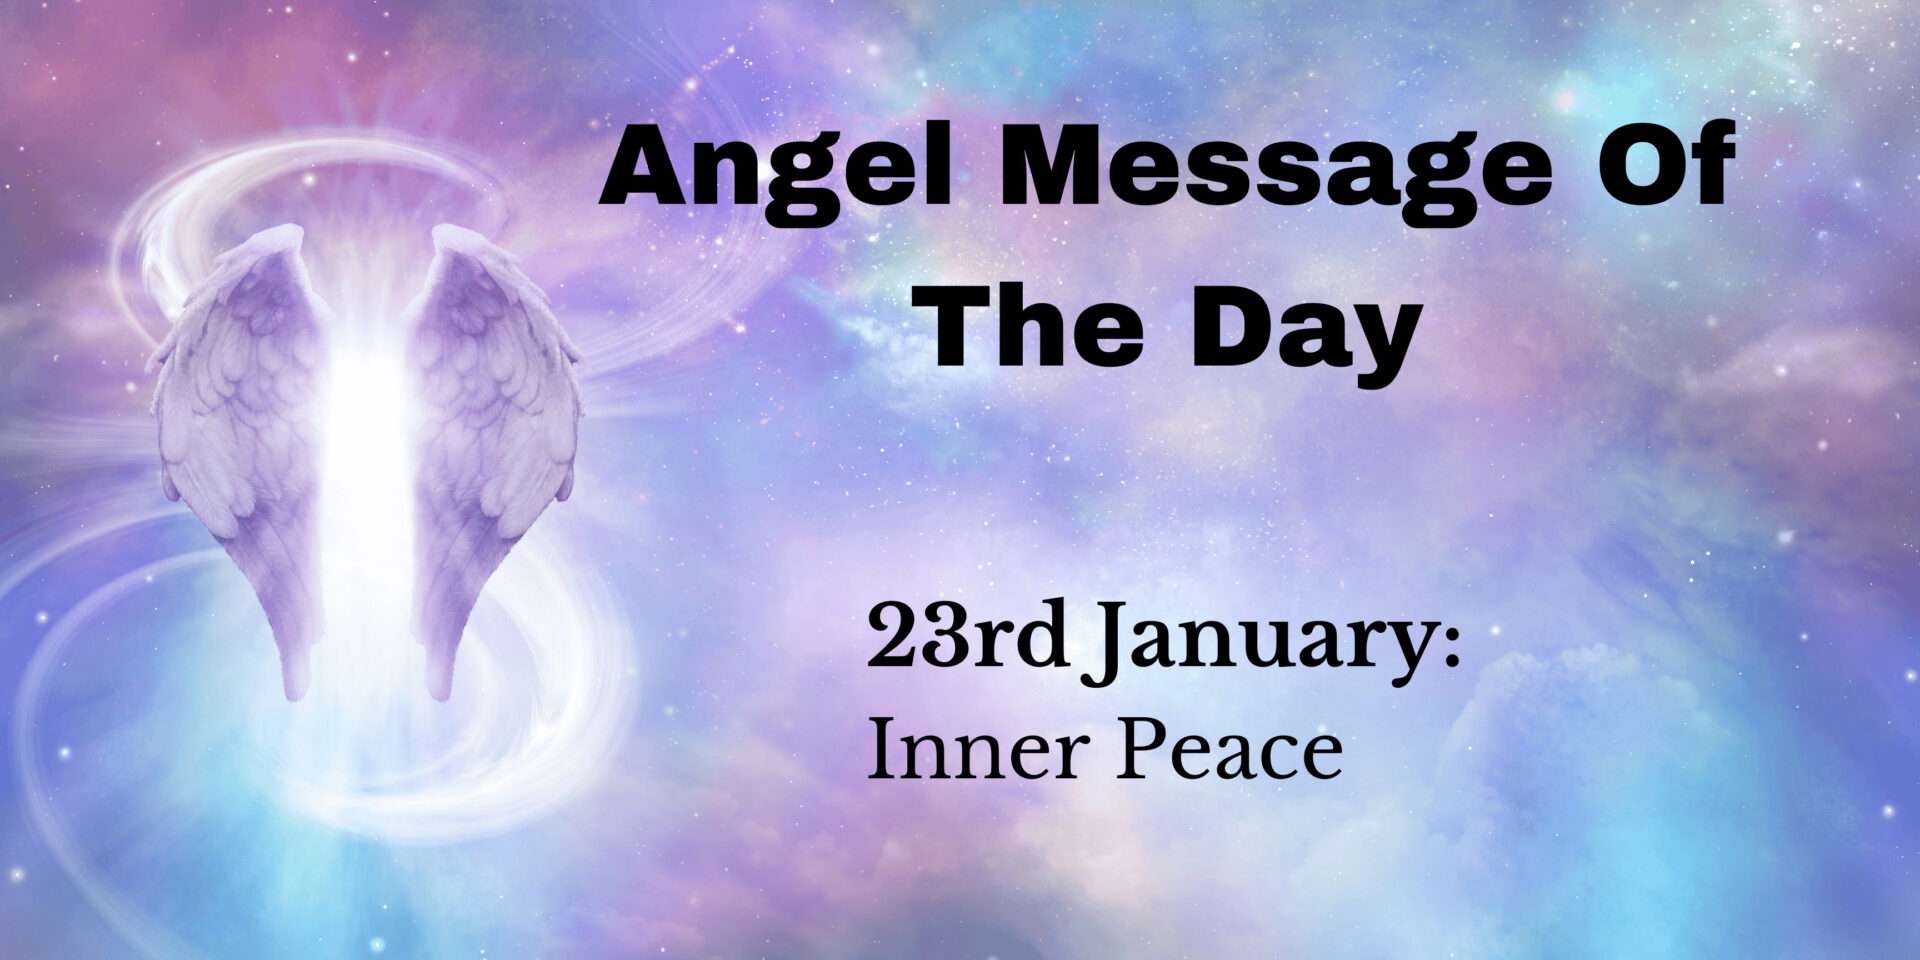 angel message of the day : inner peace